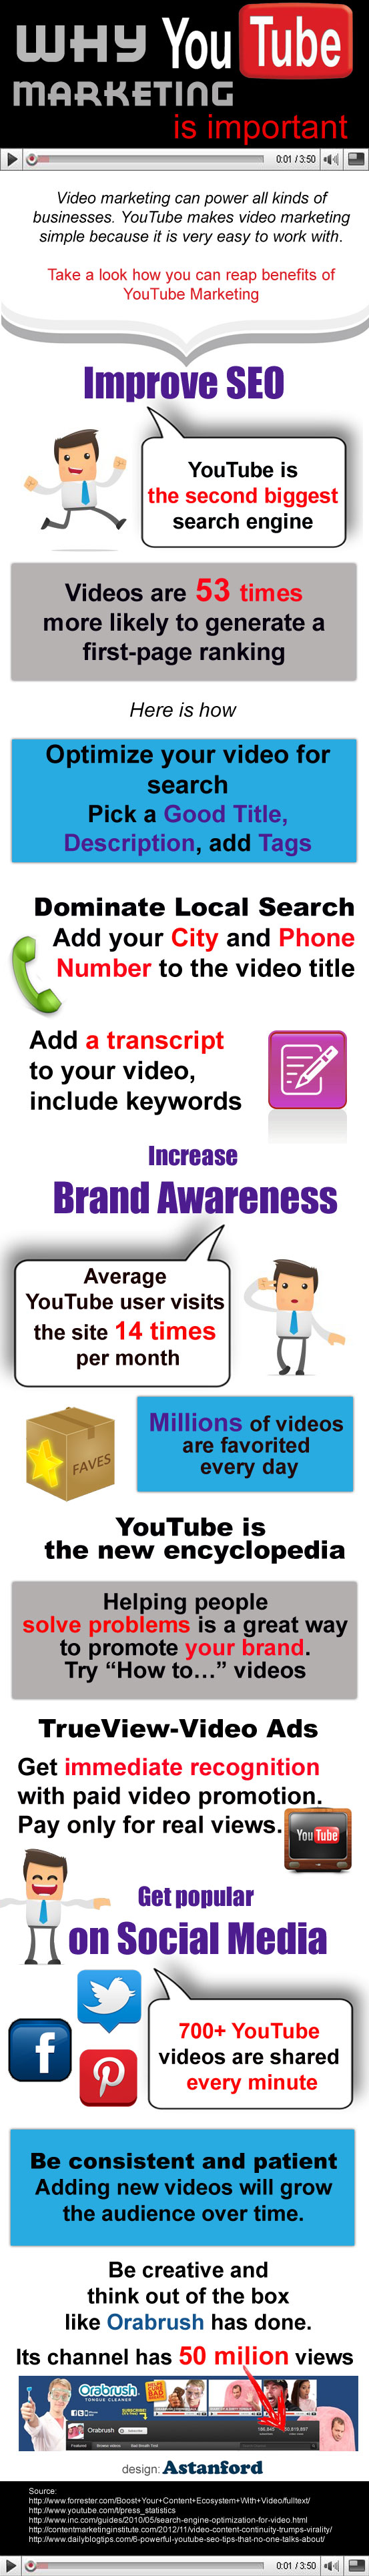 Why YouTube Marketing is Important